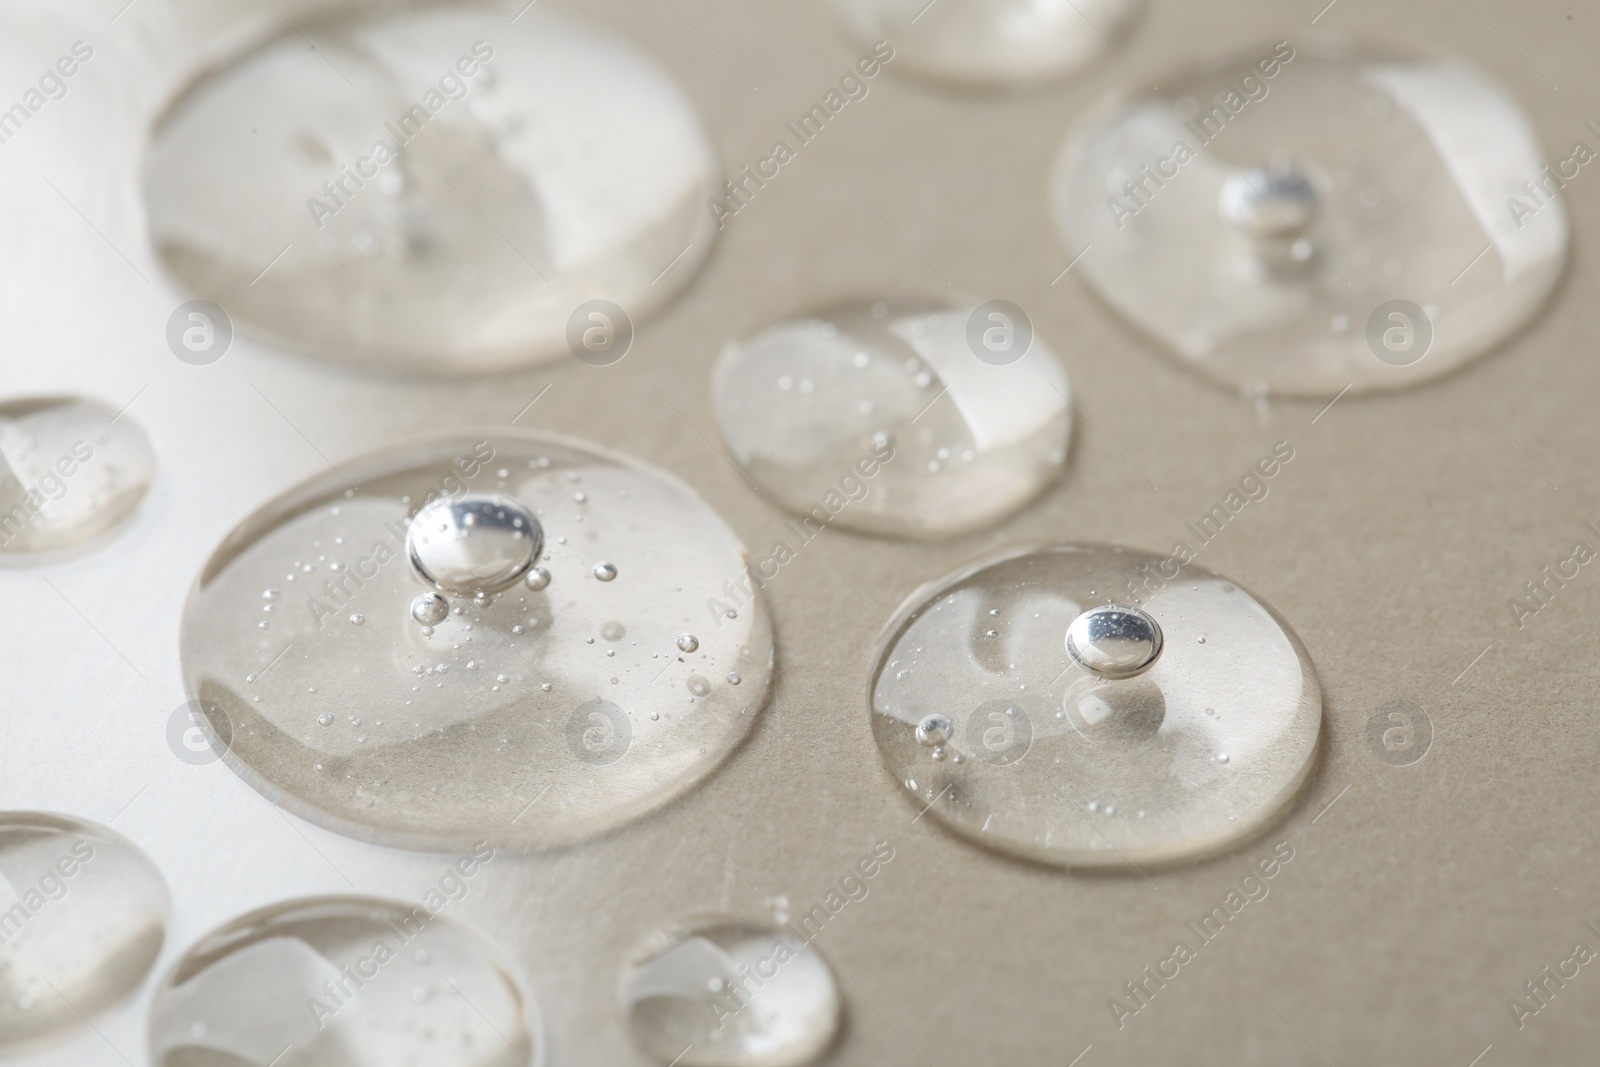 Photo of Drops of cosmetic serum on beige background, macro view